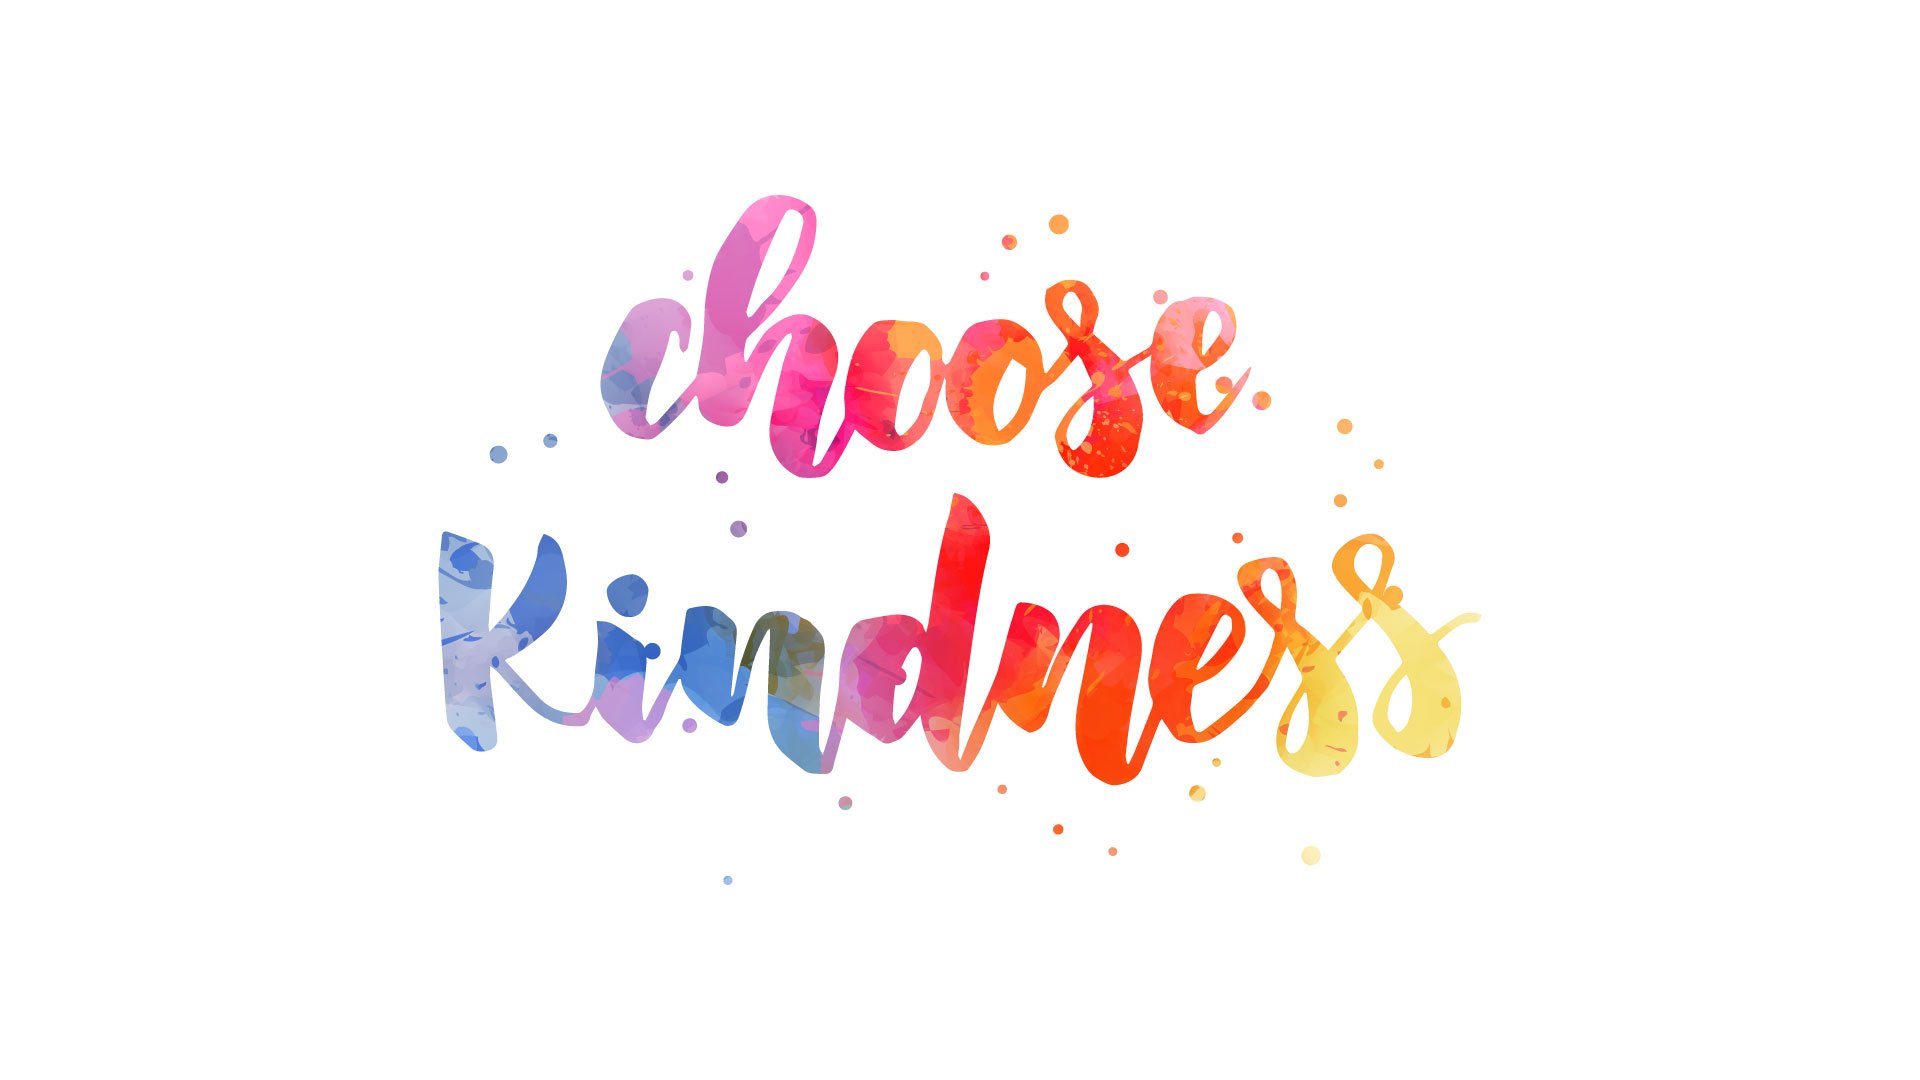 5 Kindness Lessons Your Elementary Students Will Love